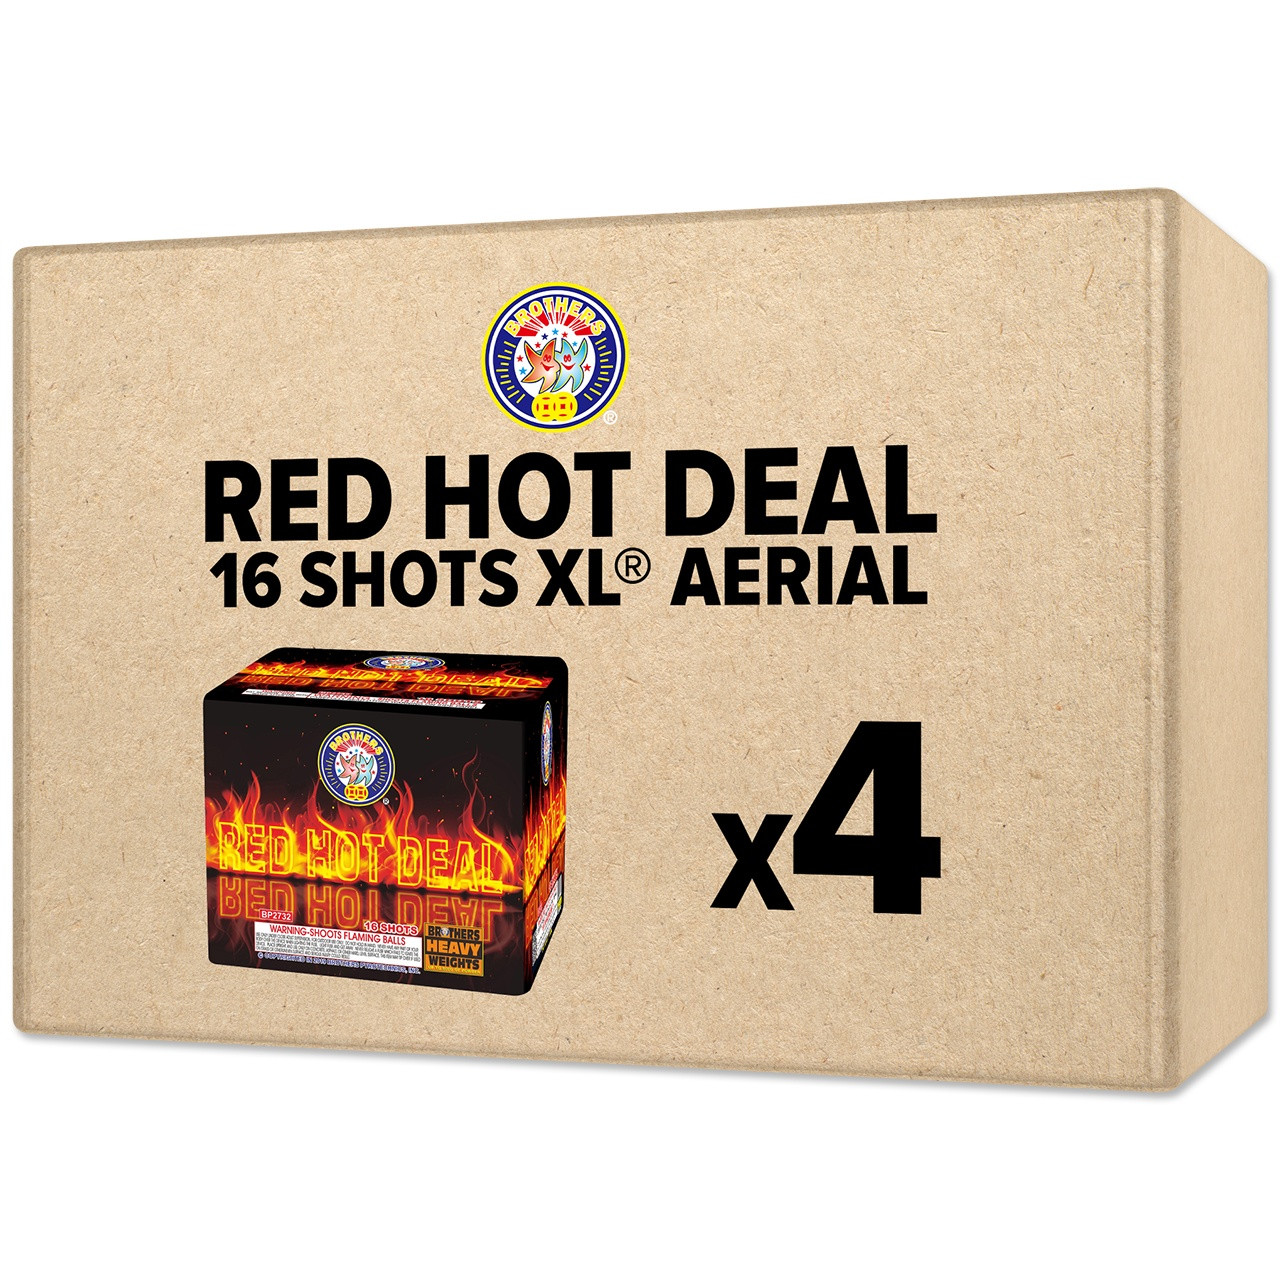 Red Hot Deal 16 Shots XL Aerial (case)- Red Apple Fireworks